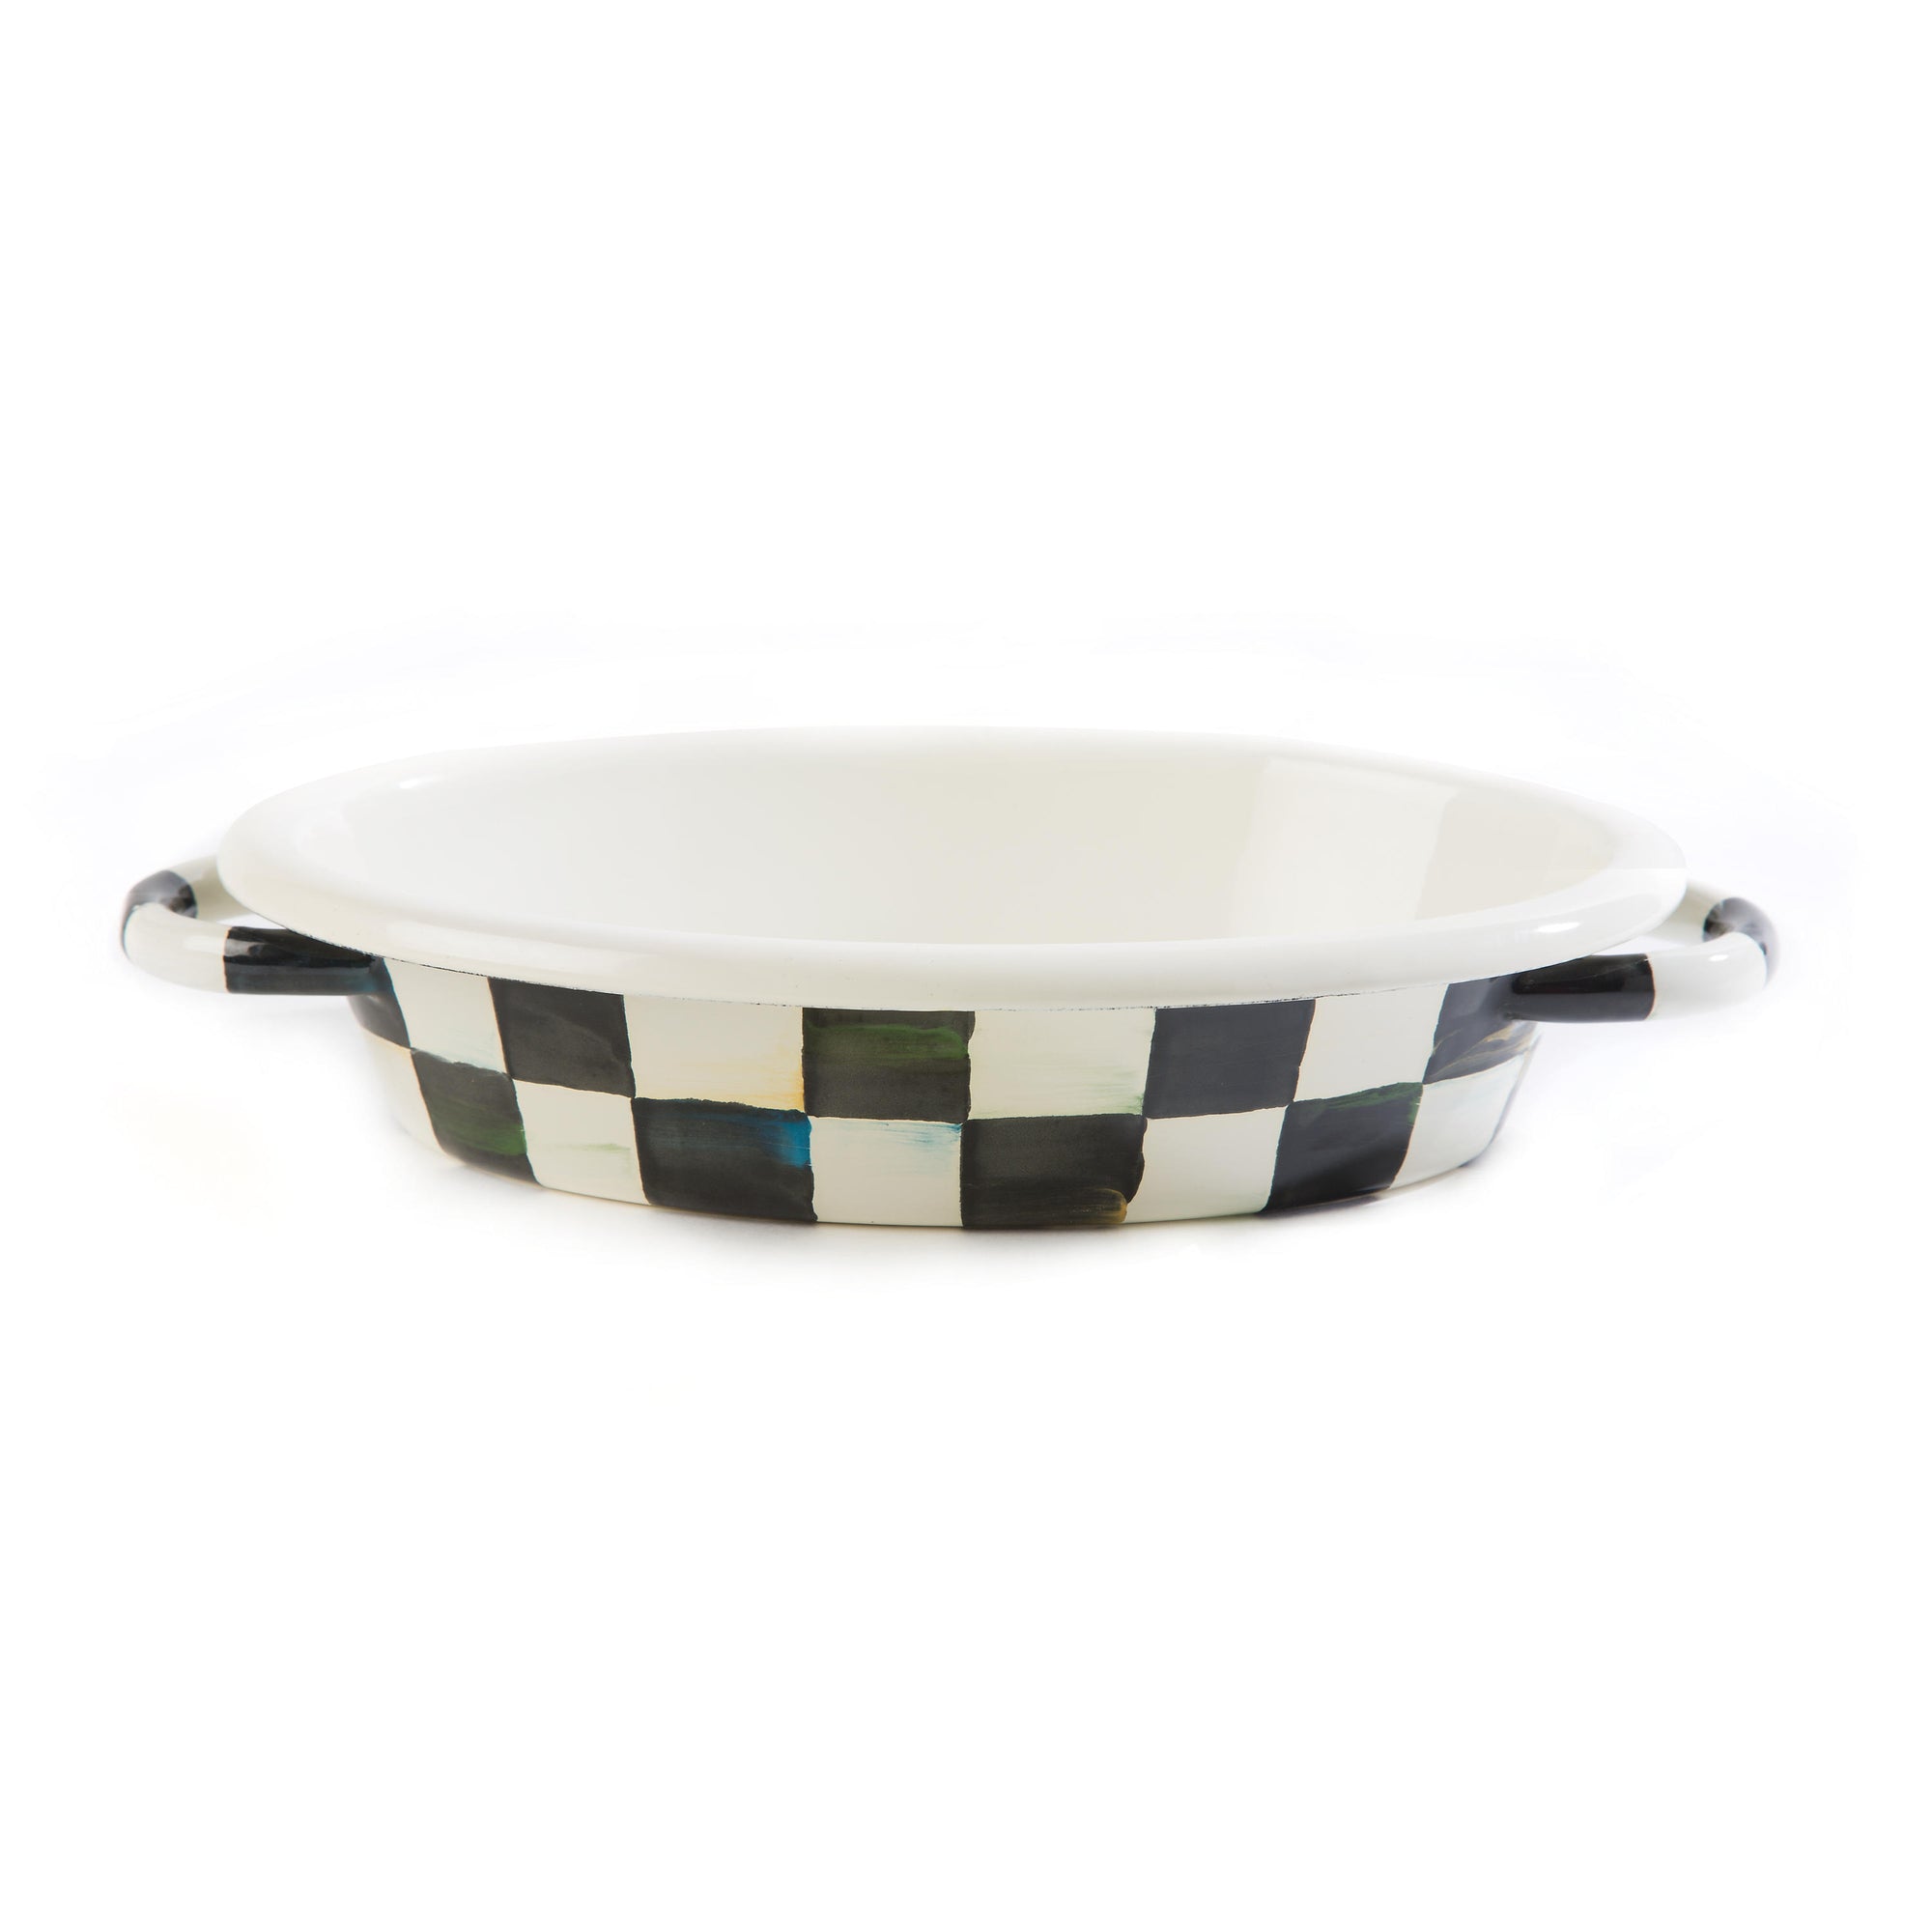 Courtly Check Enamel Oval Gratin Dish - Small